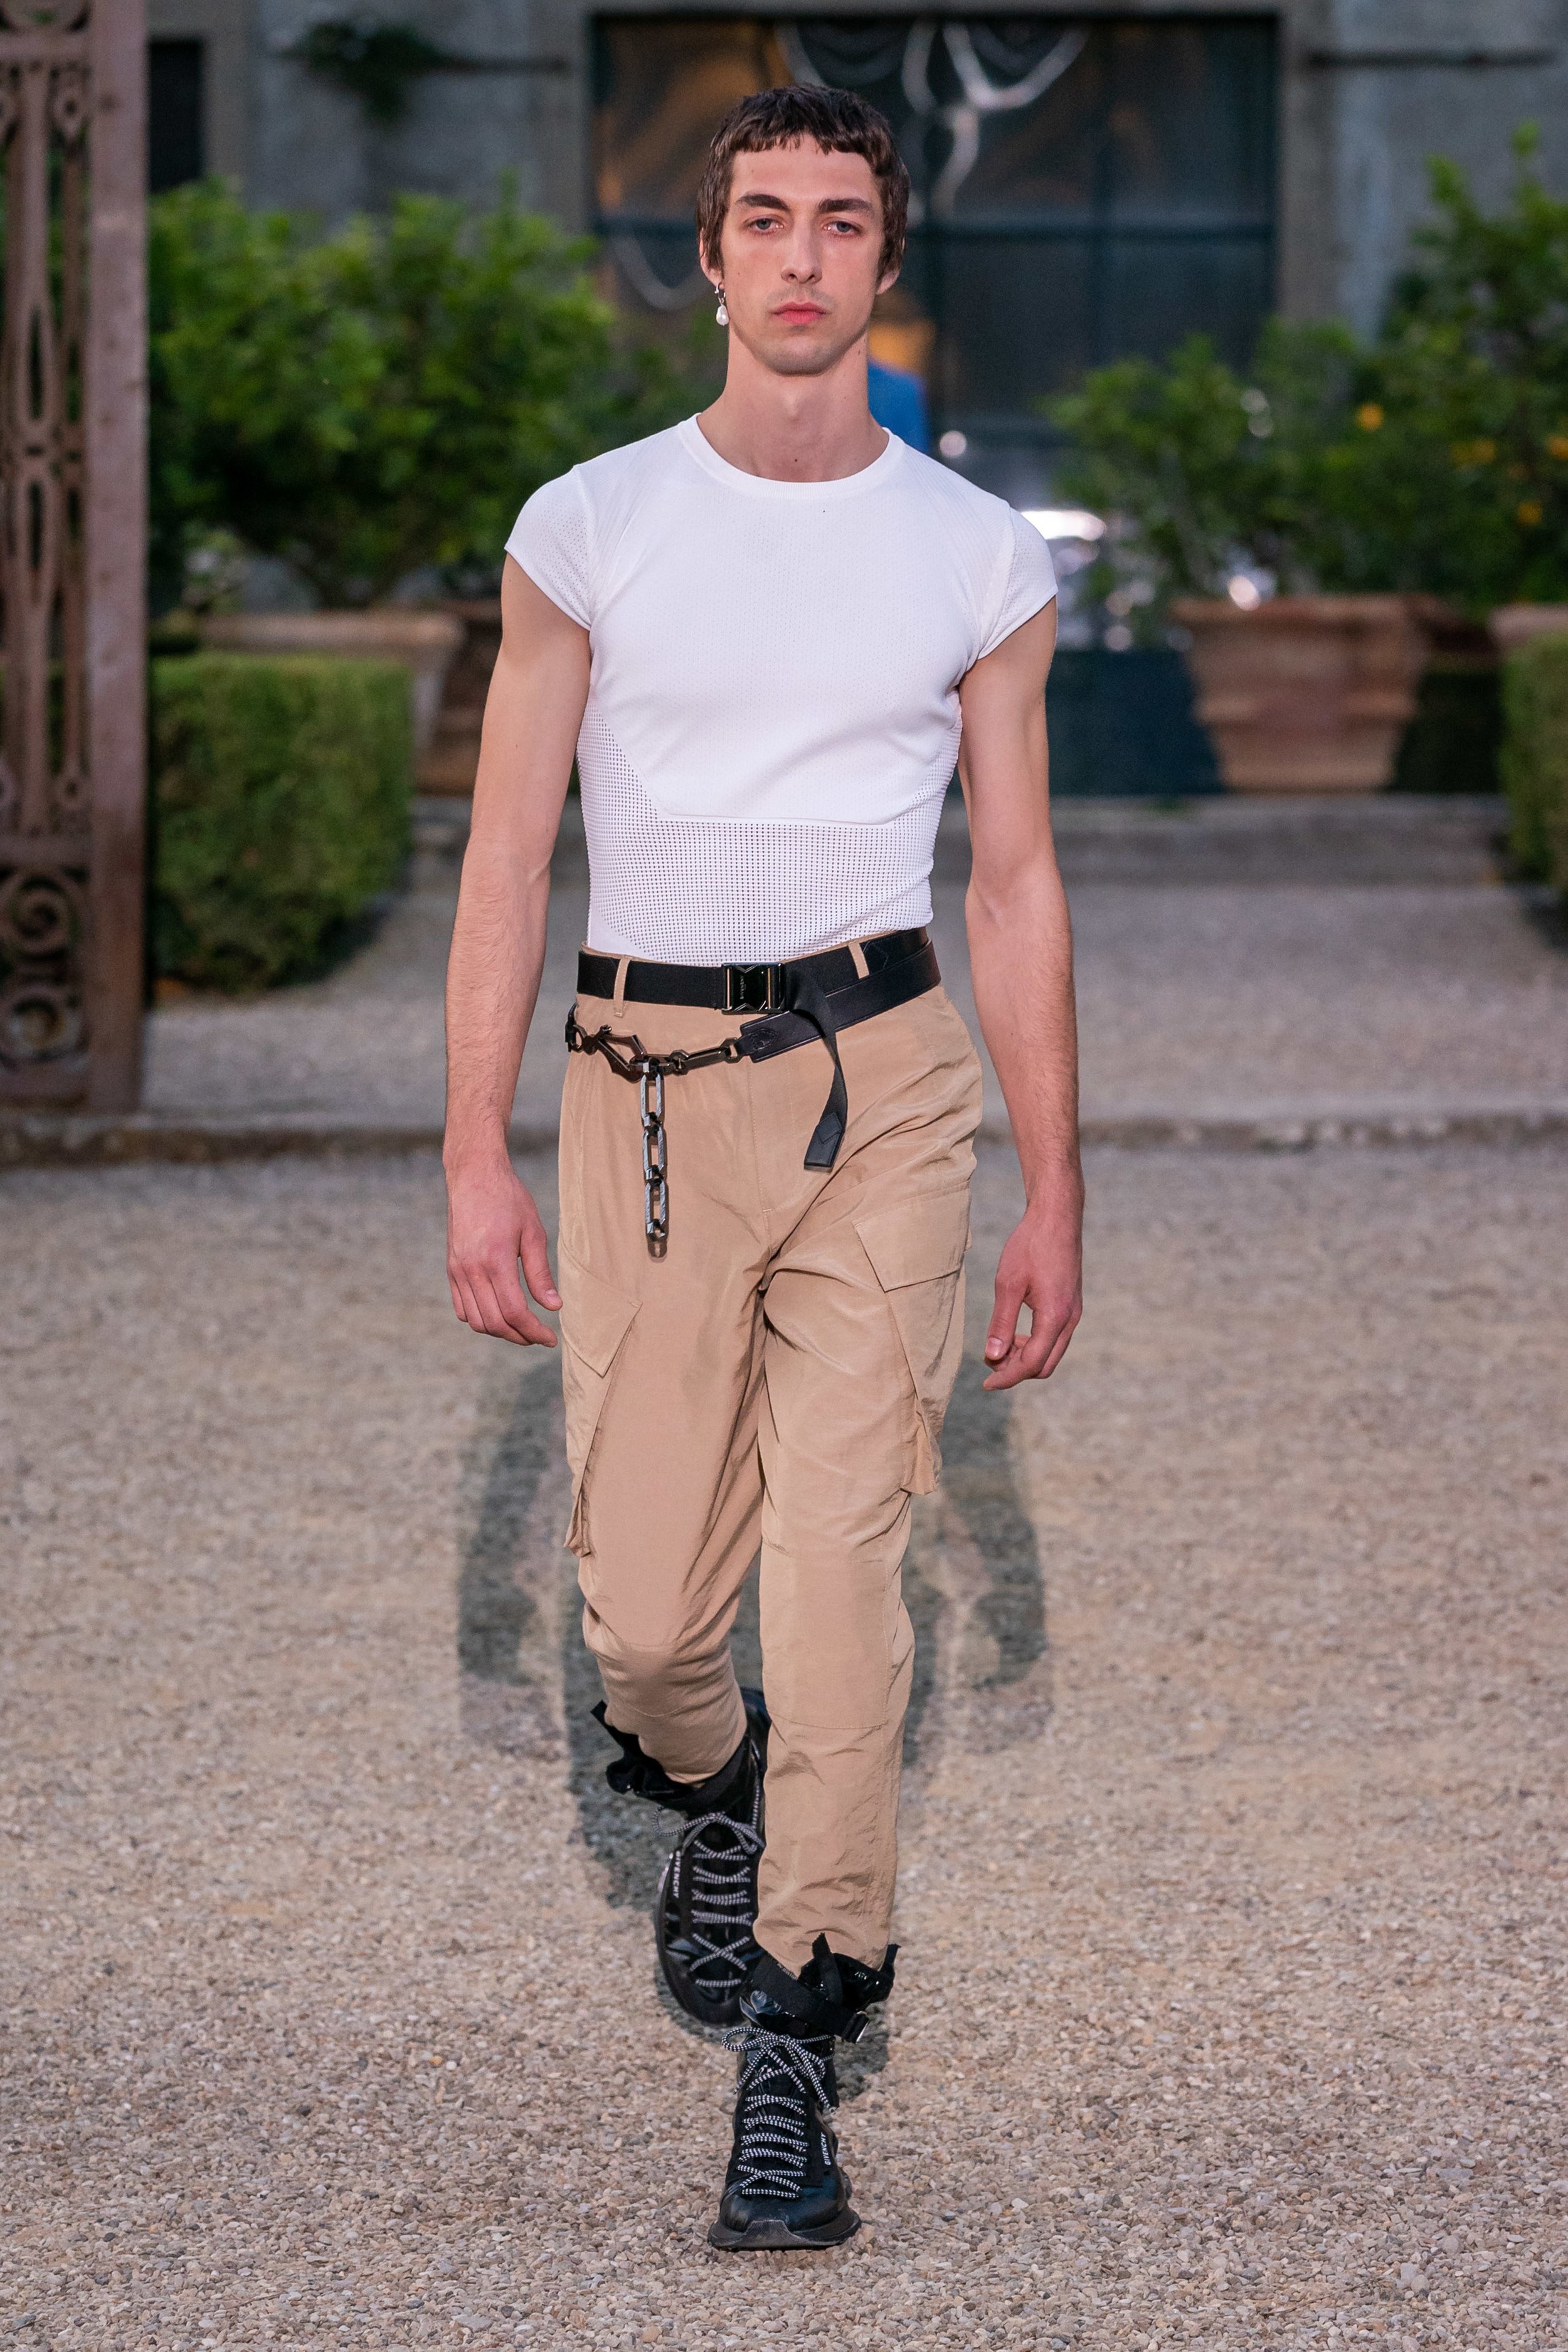 Behind_The_Blinds_Magazine_Givenchy_Men_SS20_Pitti_ALE0132.jpg